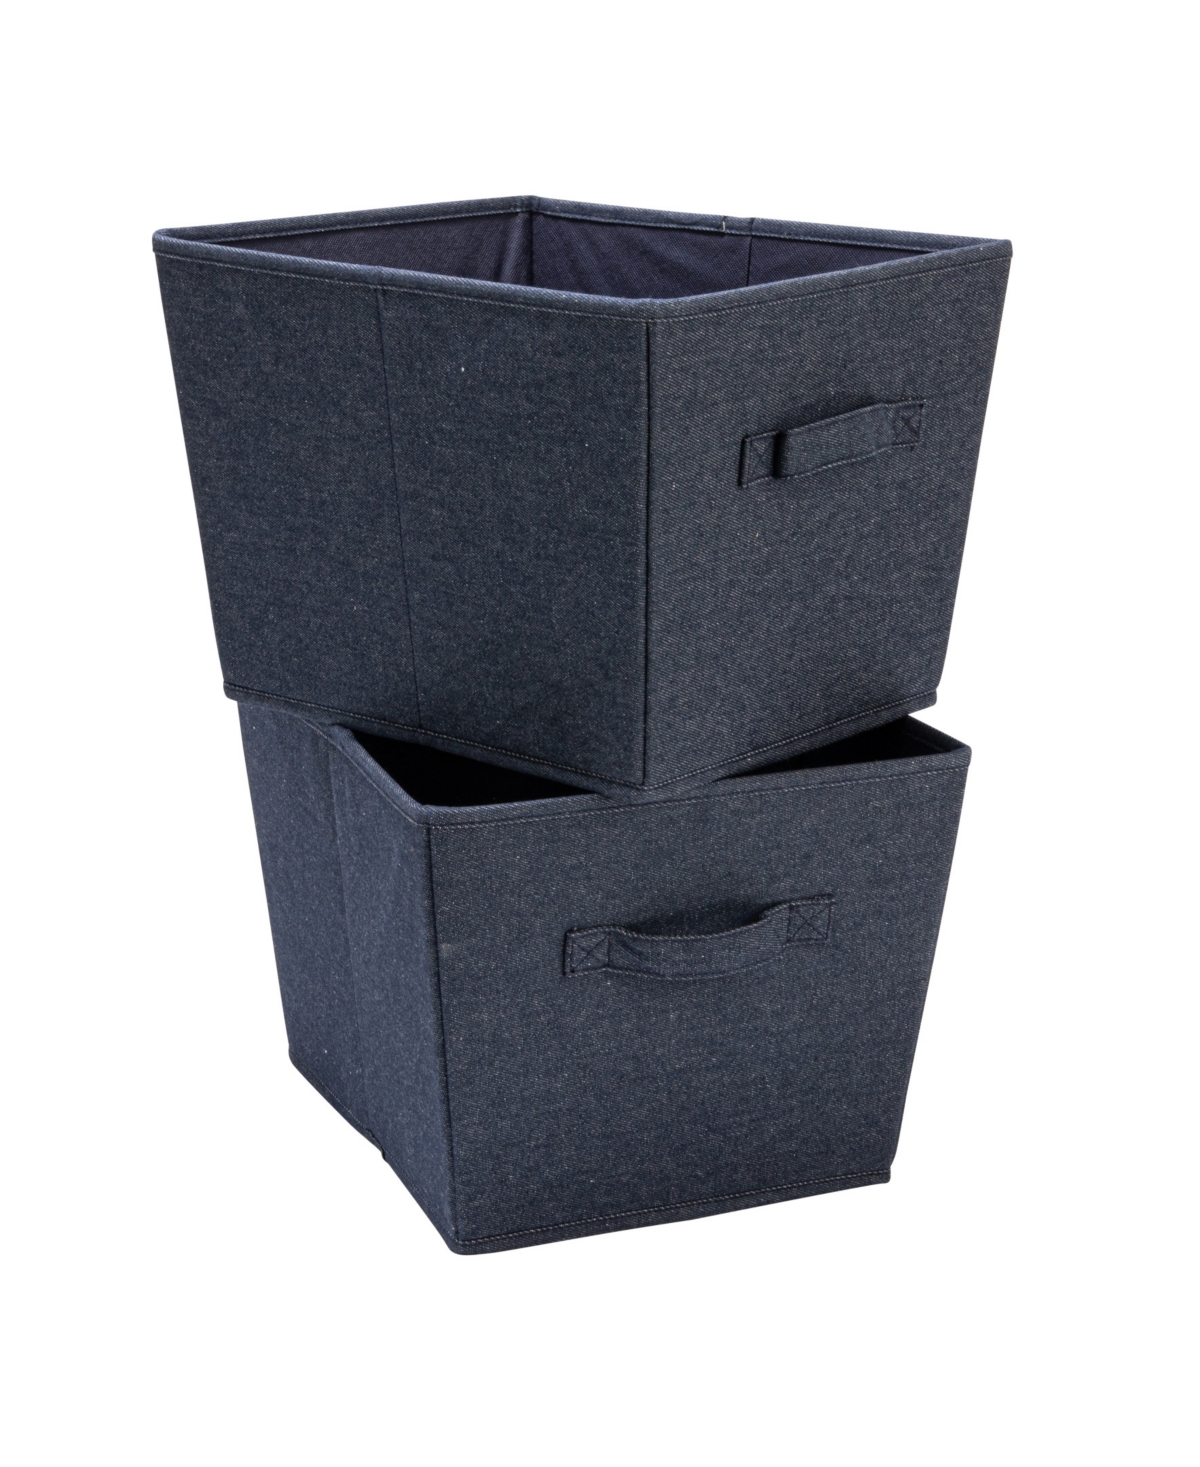 Tapered Fabric Hard-Sided Storage Bins with Cloth Handles, Set of 2 - Blue